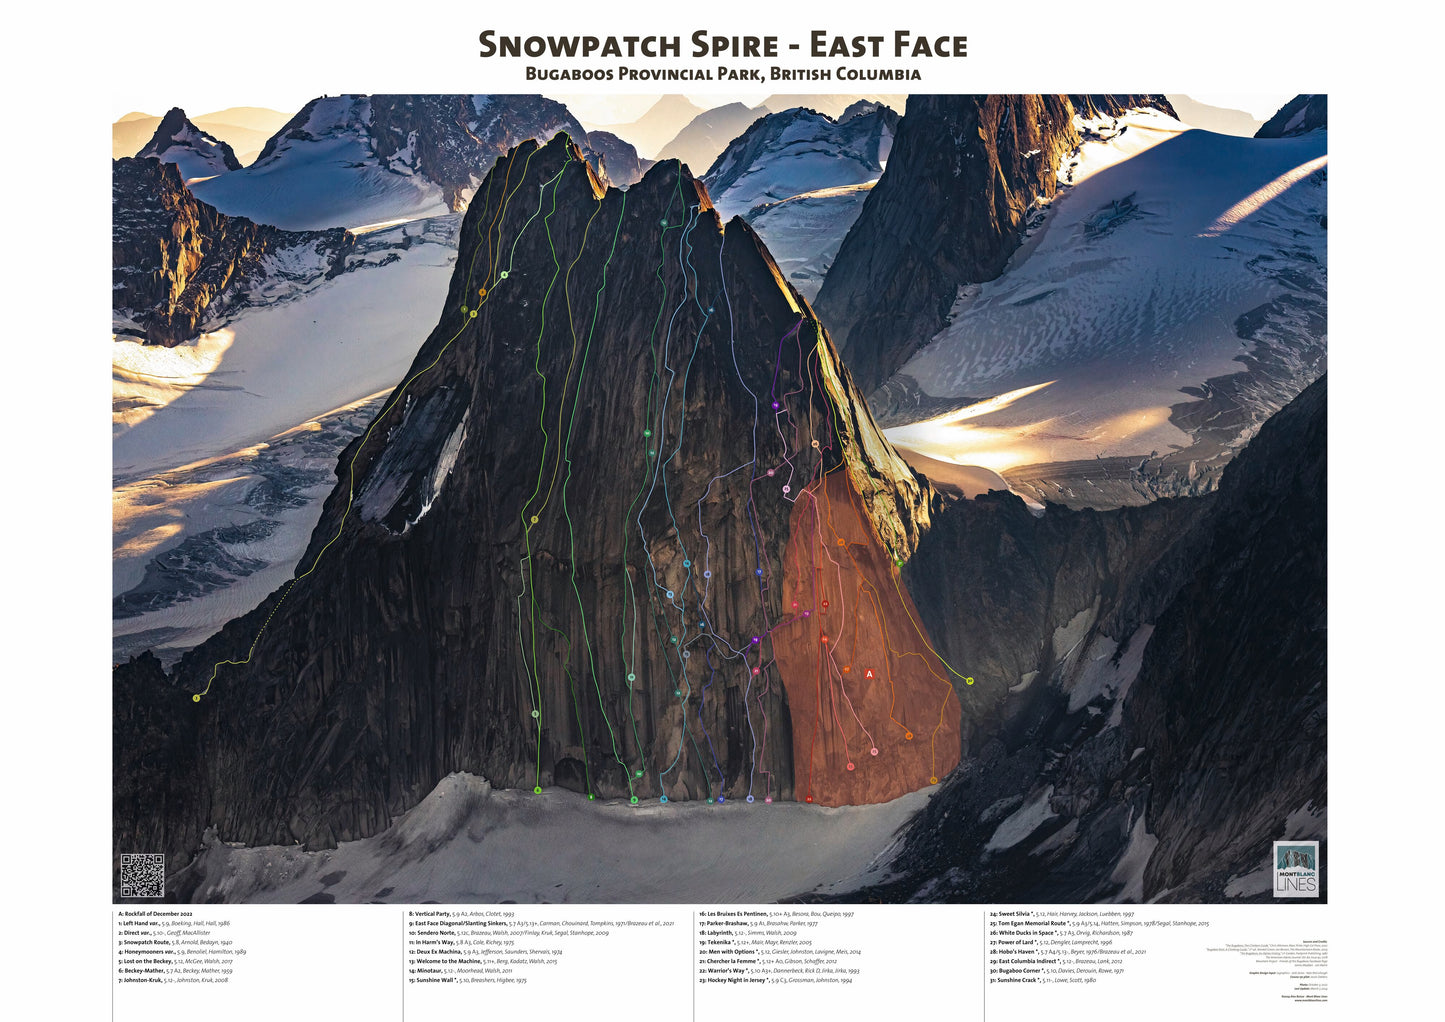 Snowpatch Spire - East Face